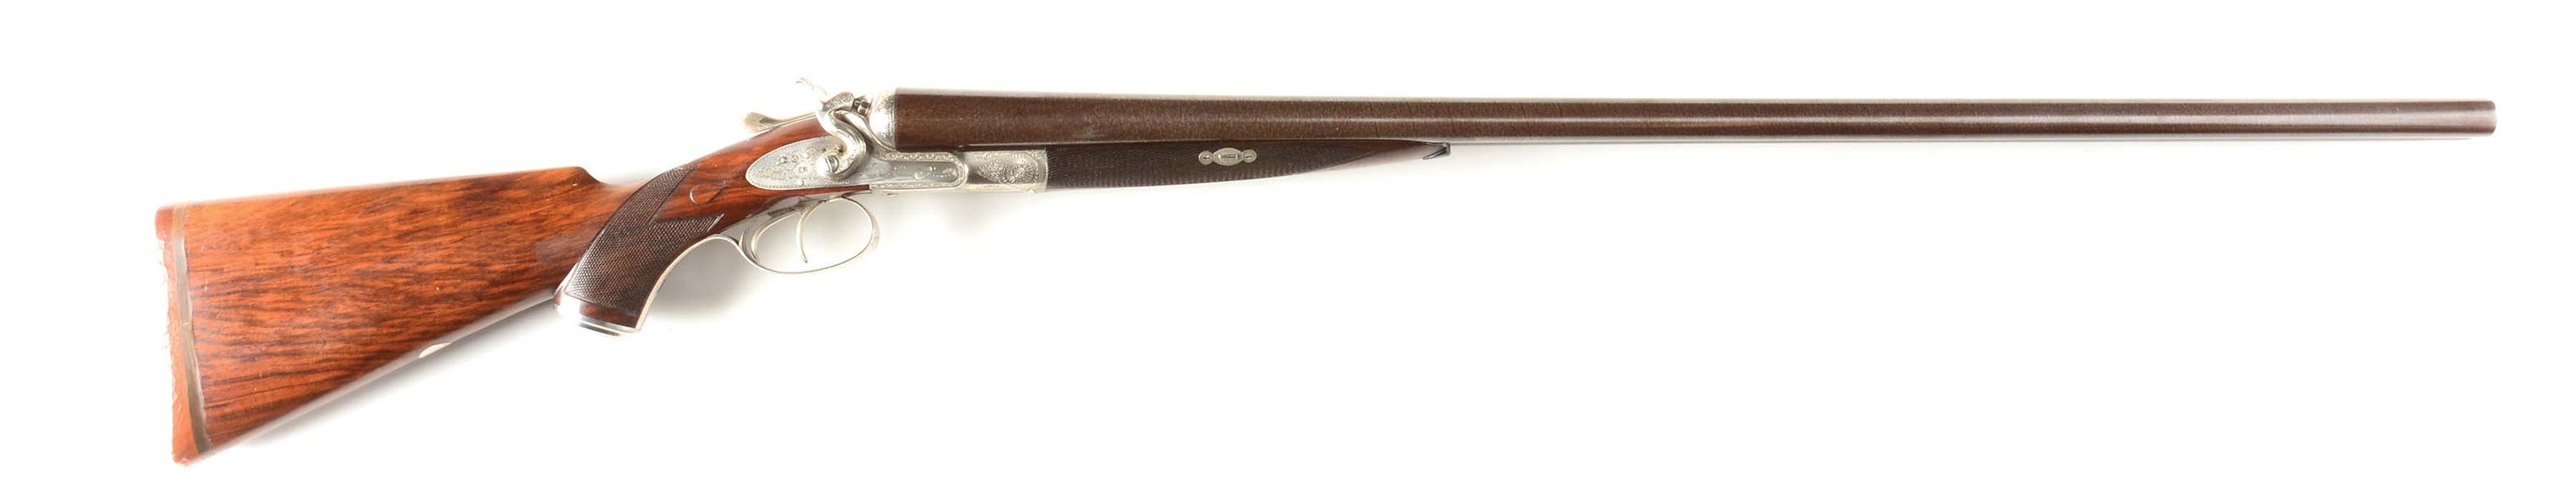 (A) EXCEPTIONAL CONDITION 8 BORE TOP LEVER HAMMER WATERFOWLER BY G. E. LEWIS WITH NICKEL-PLATED ACTION AND LOCKS.